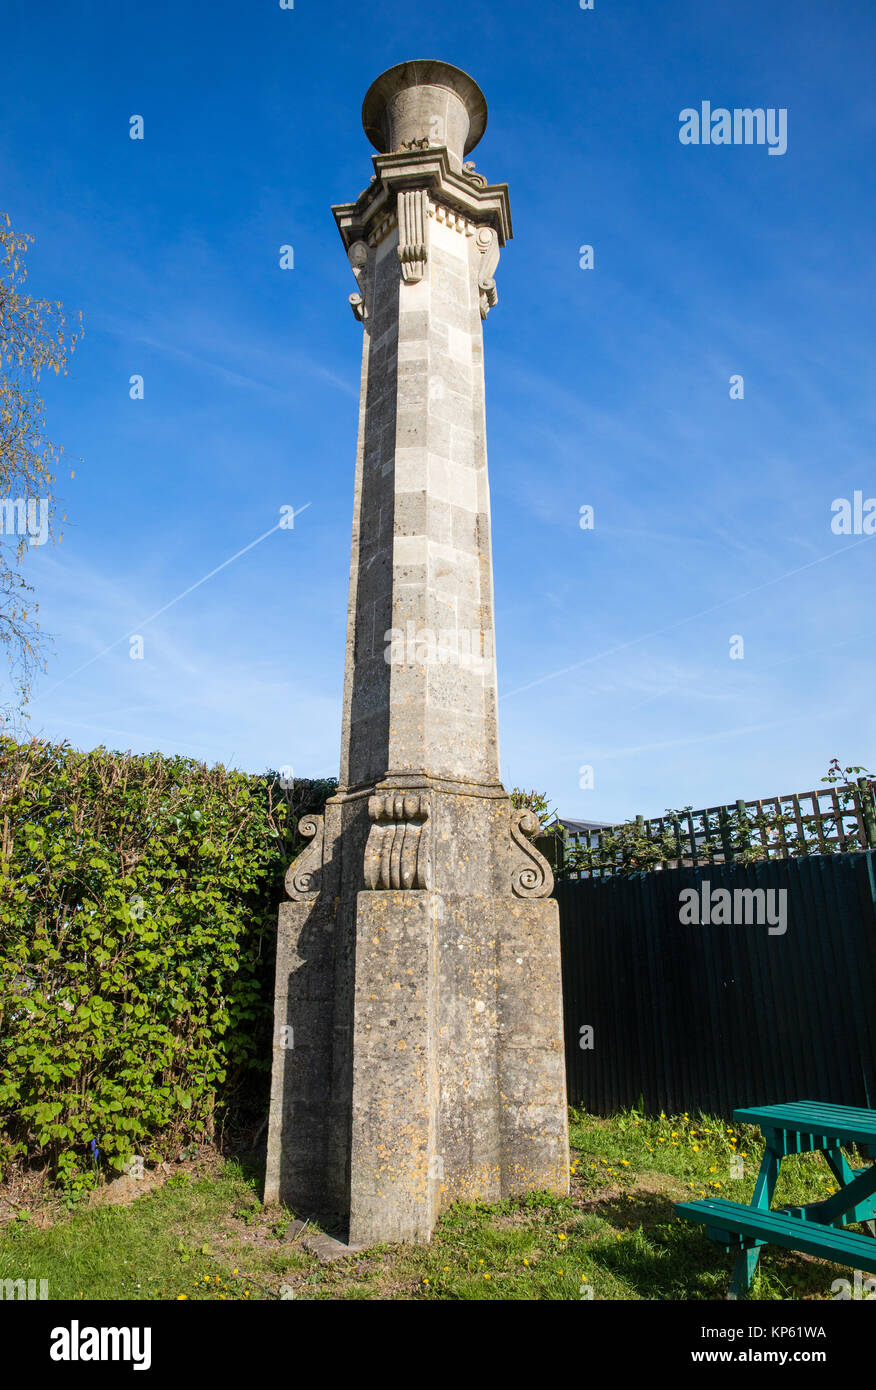 Elegant chimney in the form of a column and vase at a pumping station on the Kennet and Avon canal in Bath Somerset UK Stock Photo